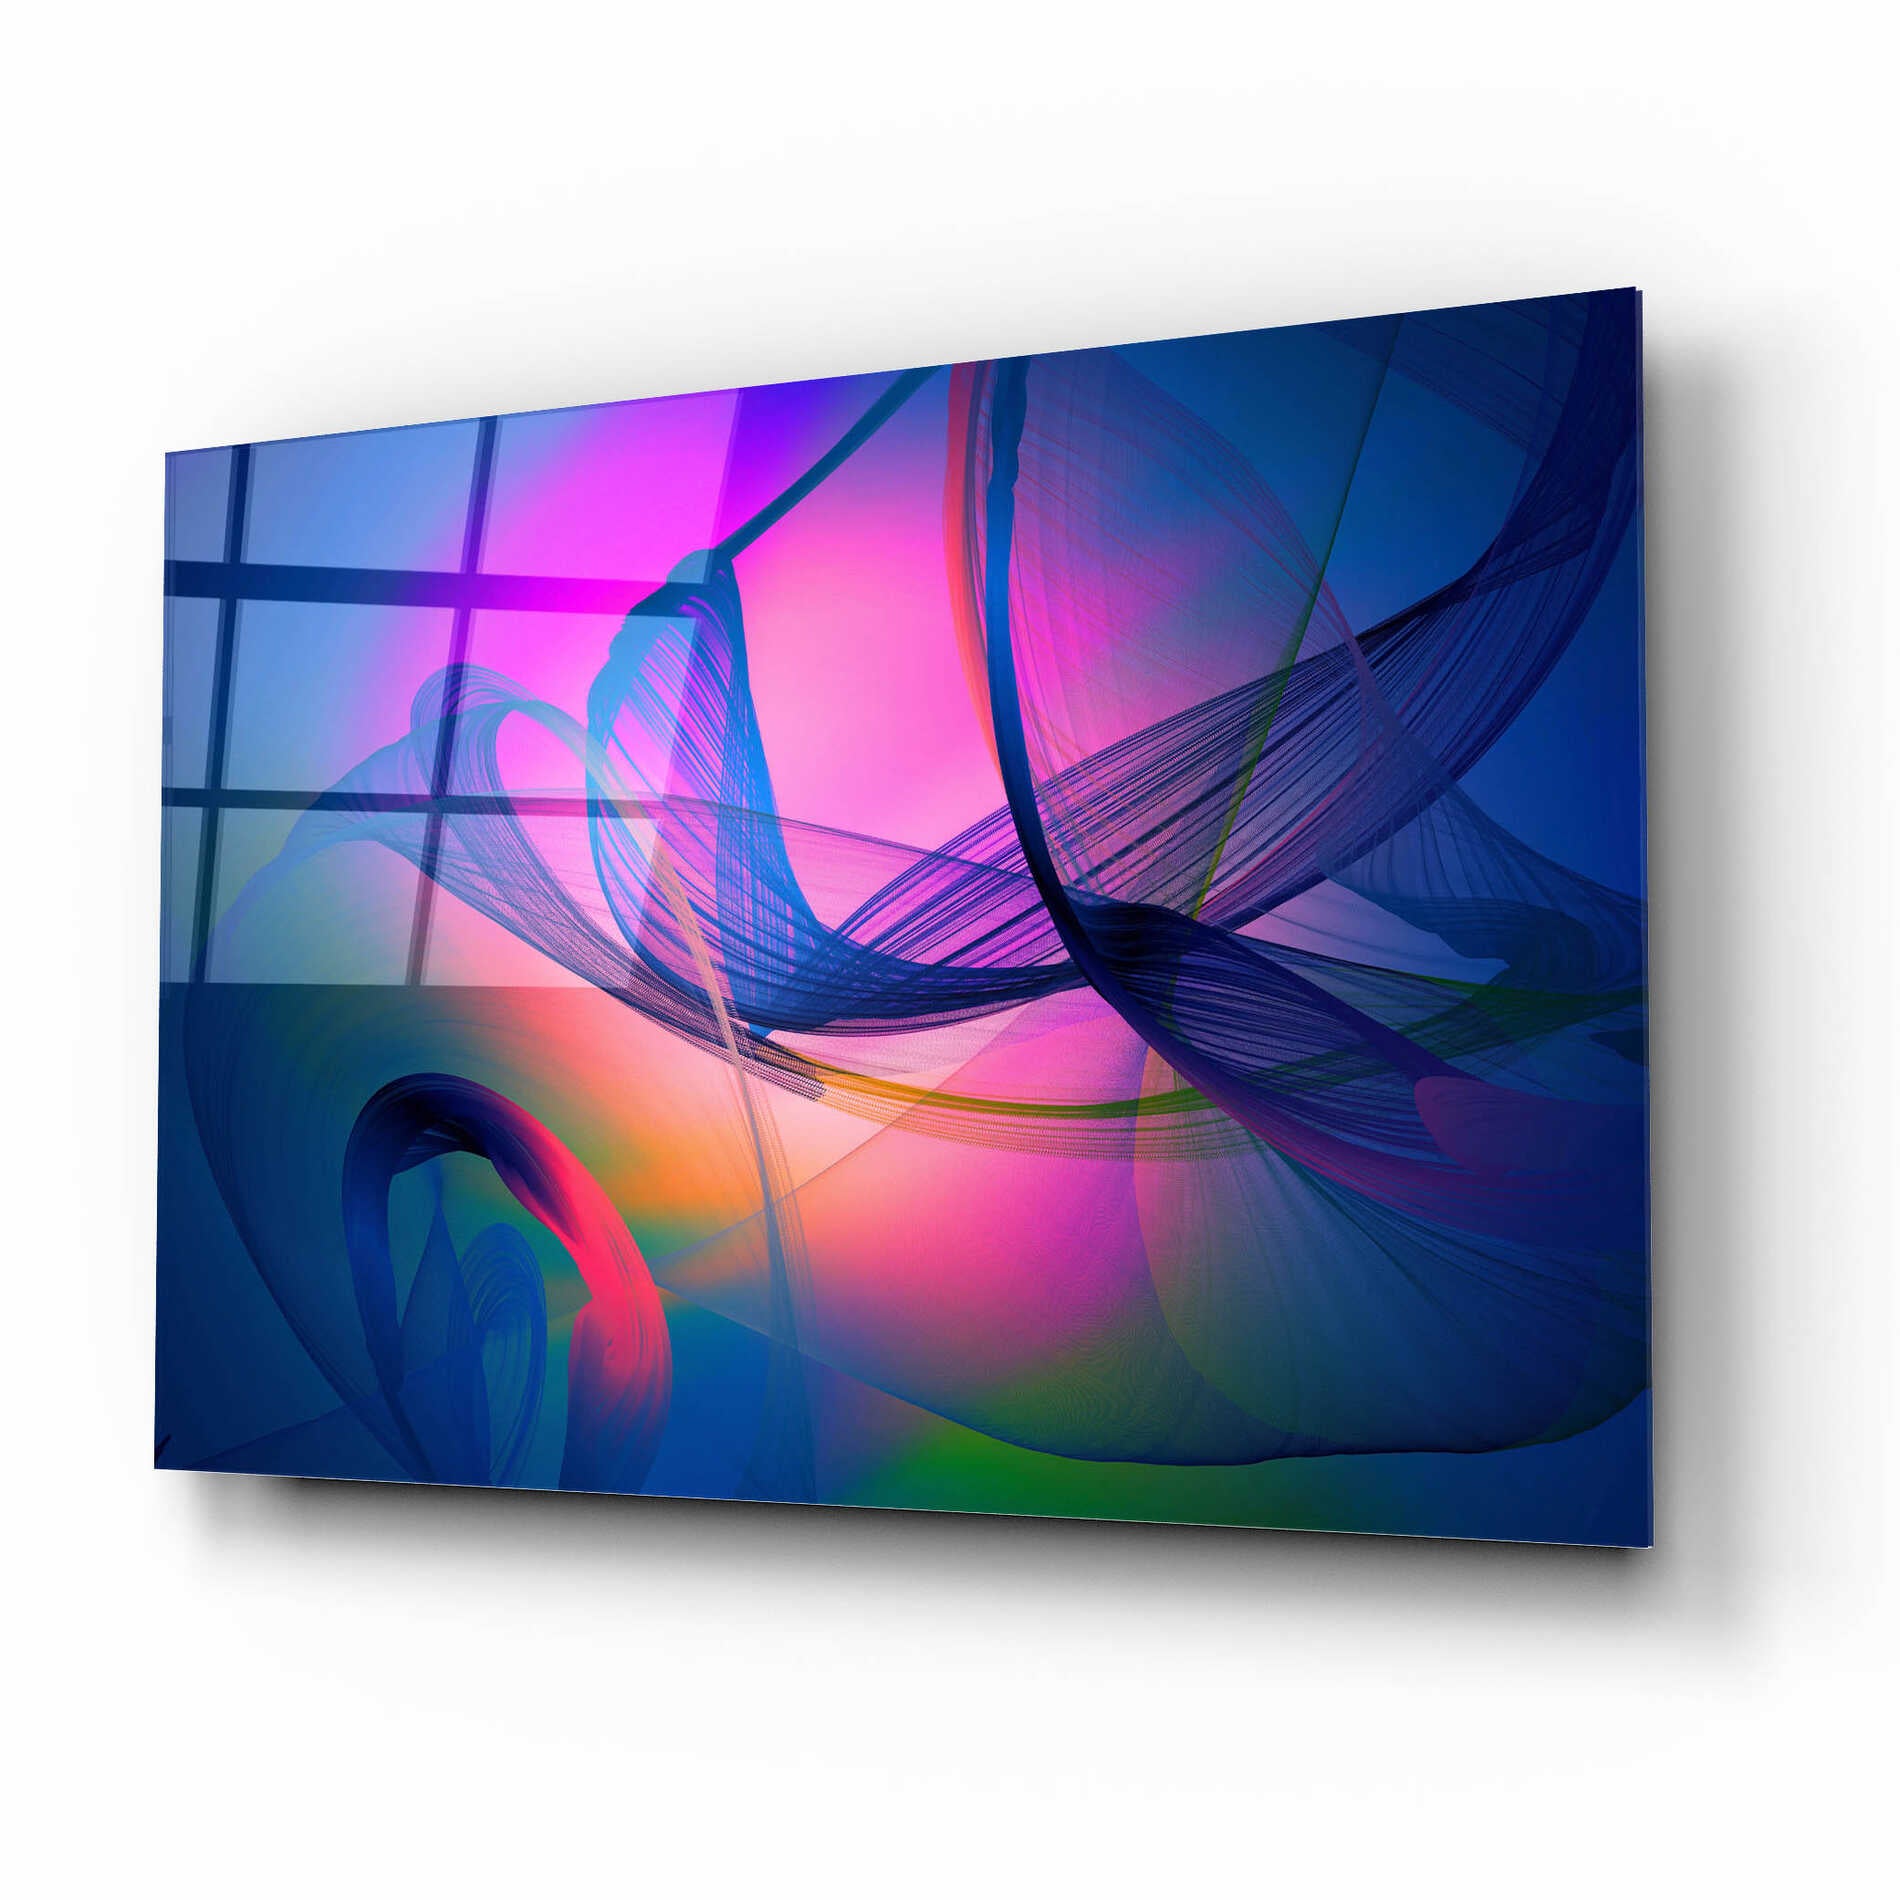 Epic Art 'Color In The Lines 31' by Irena Orlov, Acrylic Glass Wall Art,16x12